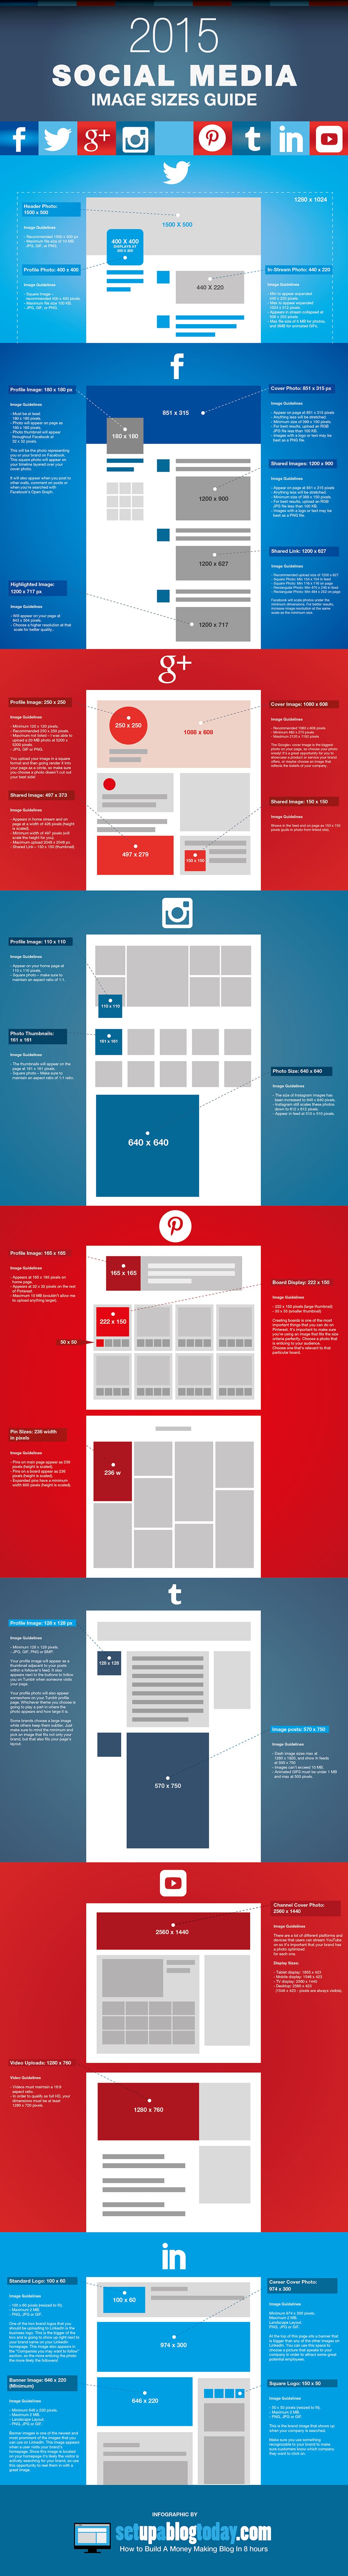 2015 Social Media Image Size Cheat Sheet [Infographic]